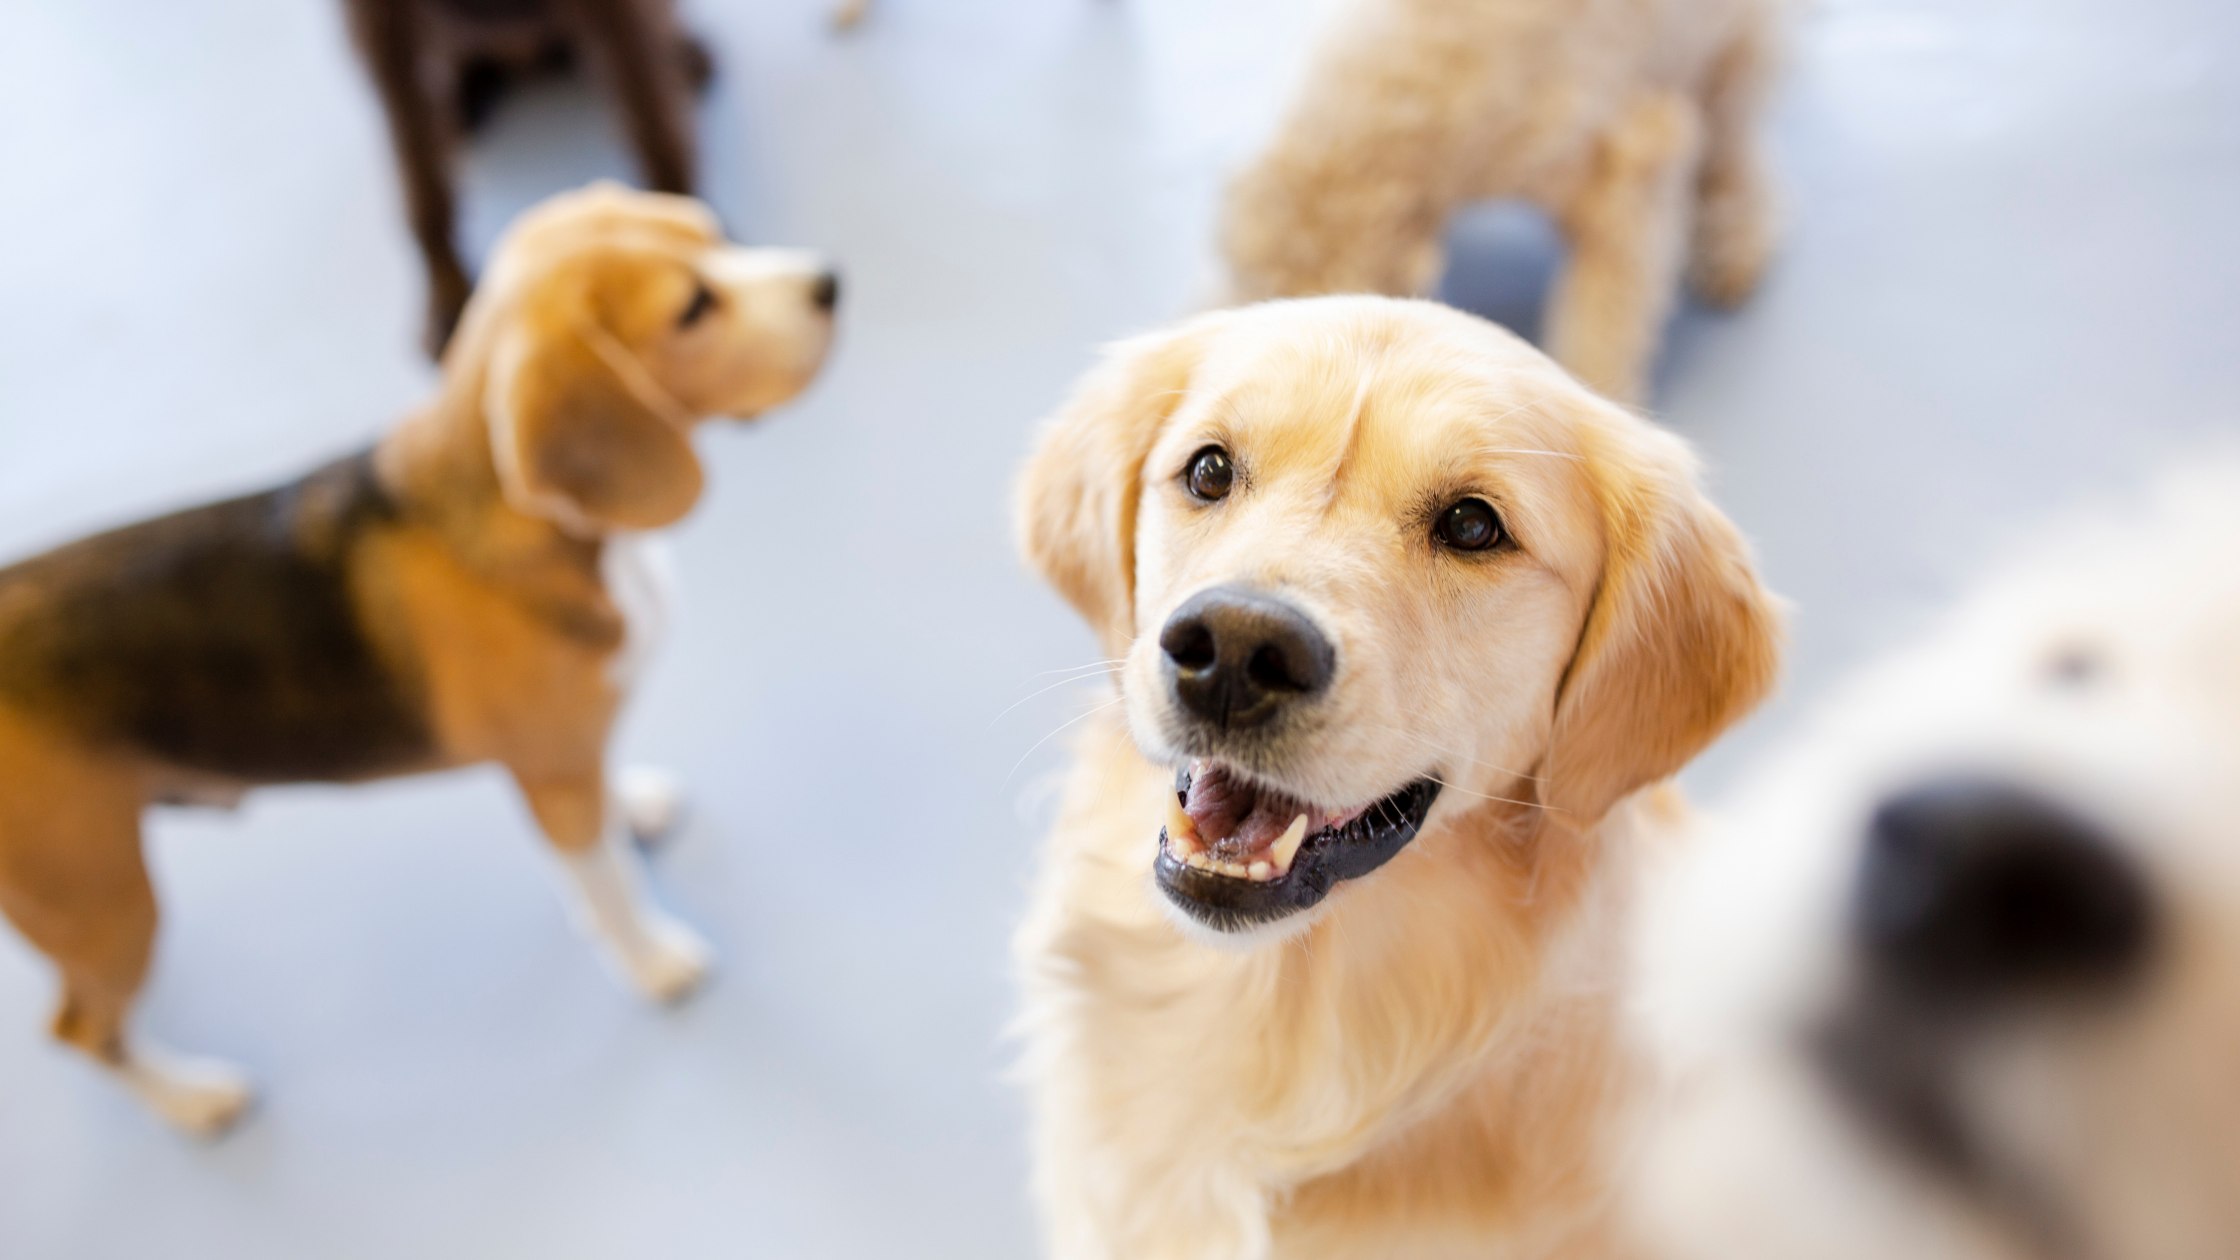 A Guide to Canine Play Behavior: What’s Normal and What’s Not